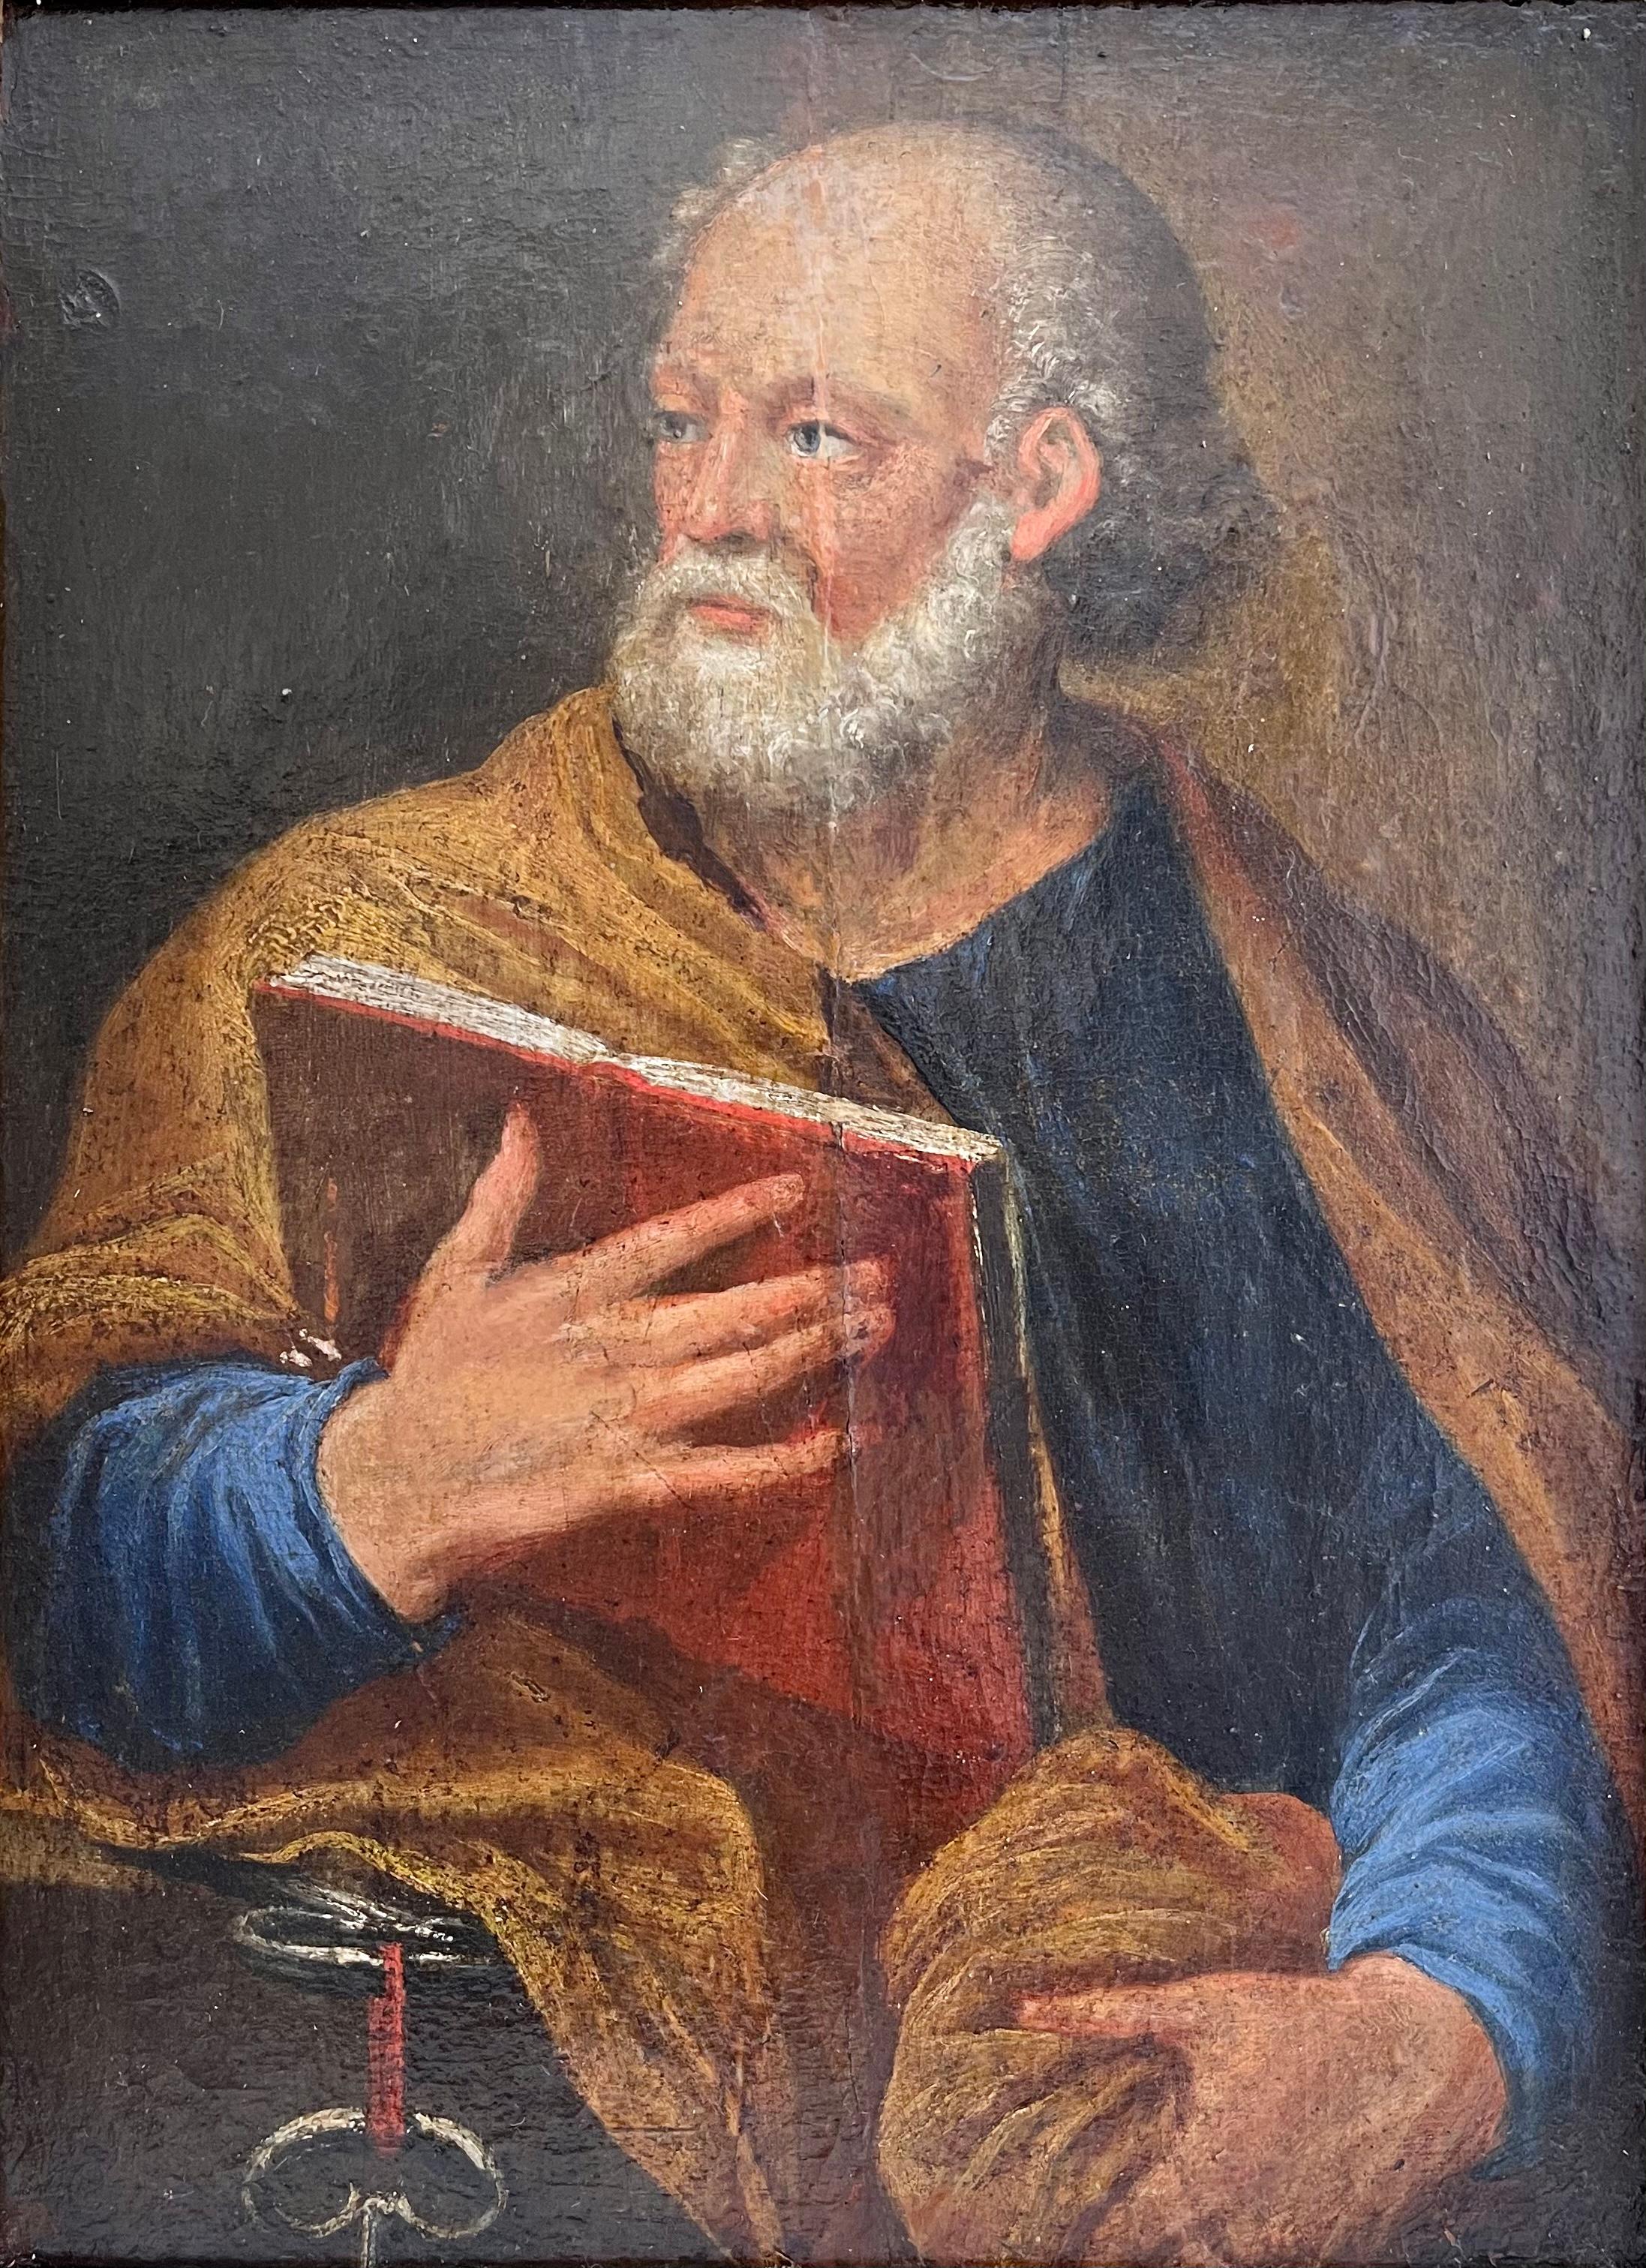 Portrait of Saint Peter, oil on wood panel with attractive gilded frame. 
** Saint Peter, whose real name is Simon Bar-Jona according to the testimony of the Gospels, also called Kephas or Simon-Peter, is a Jew from Galilee or Gaulanitide known to